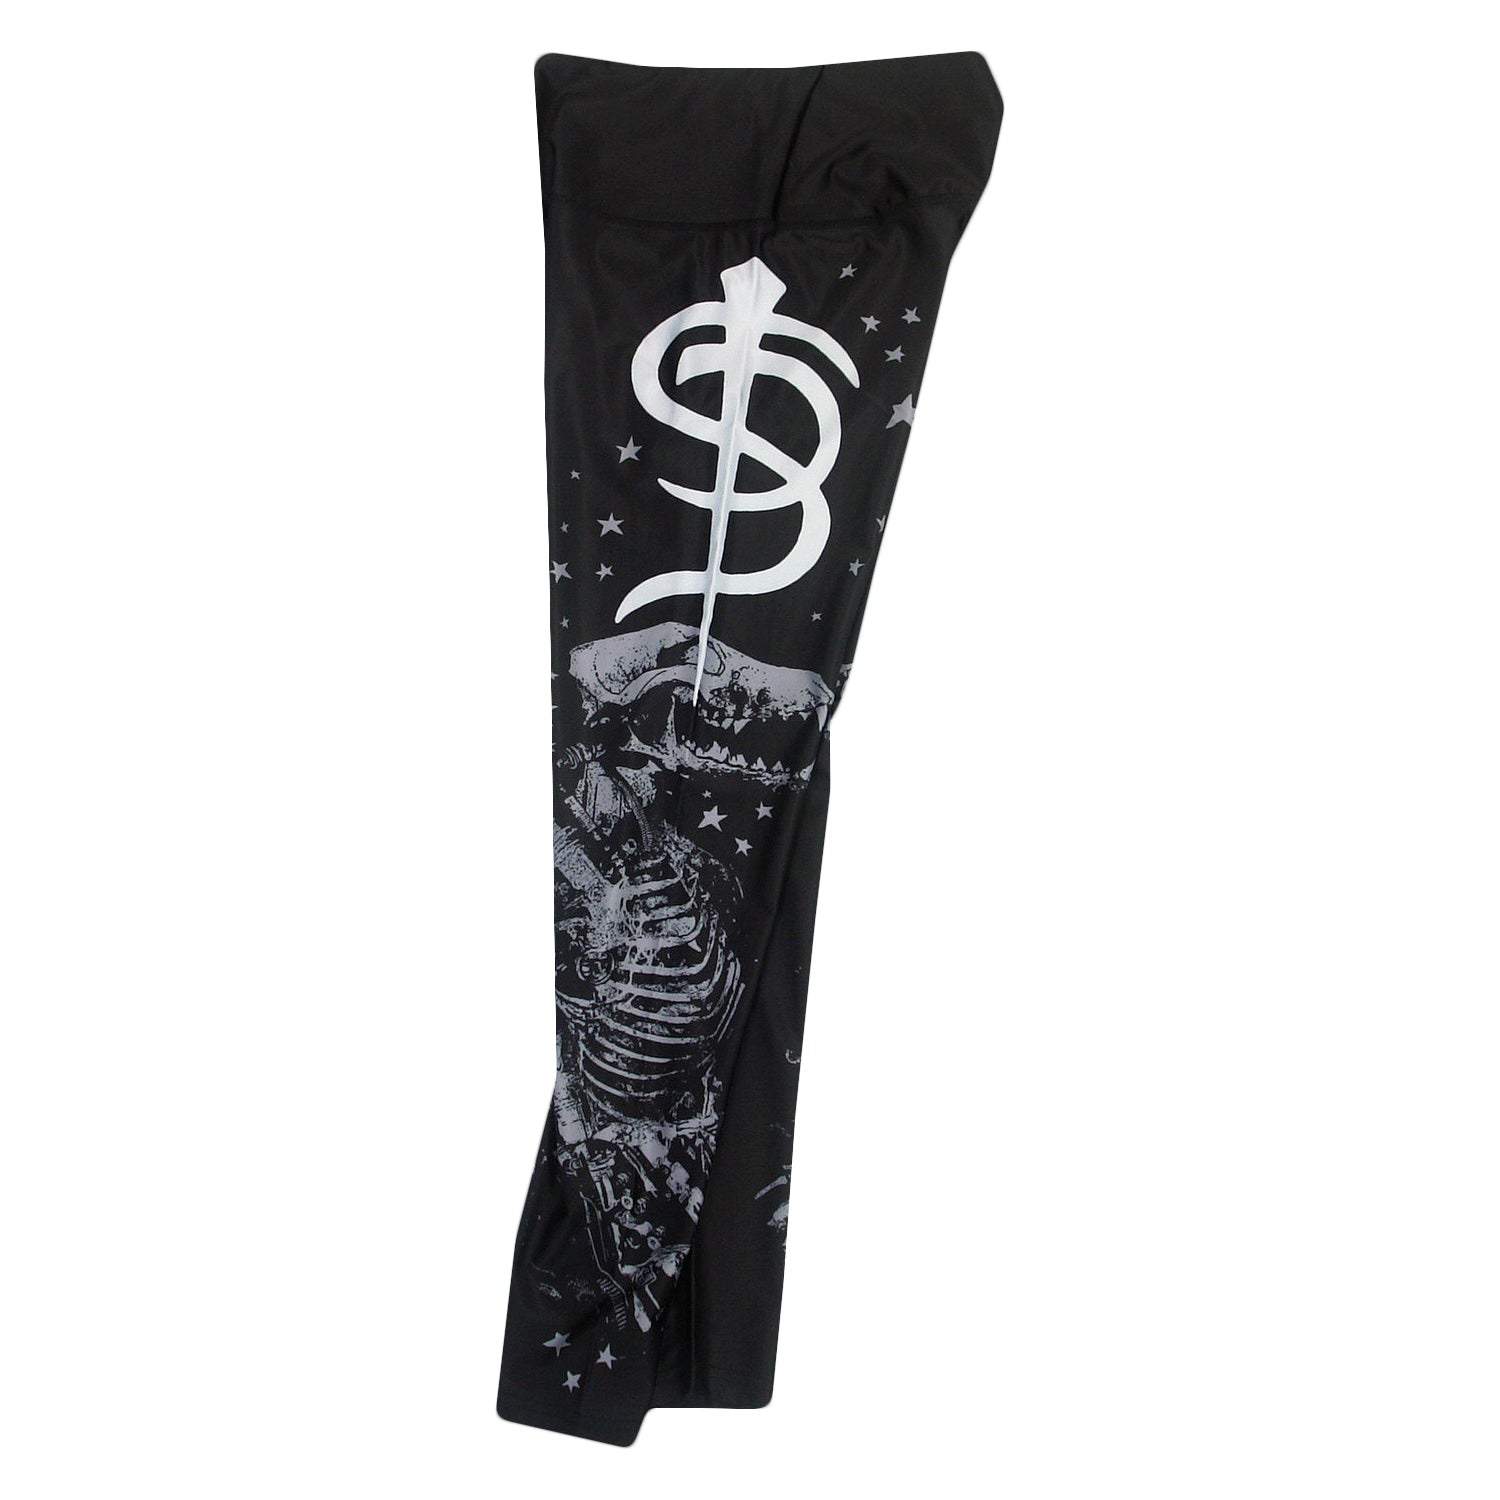 image of the side view of black leggings on a white background. leggings have side prints on both legs of the skinny puppy logo and then and animal skeleton